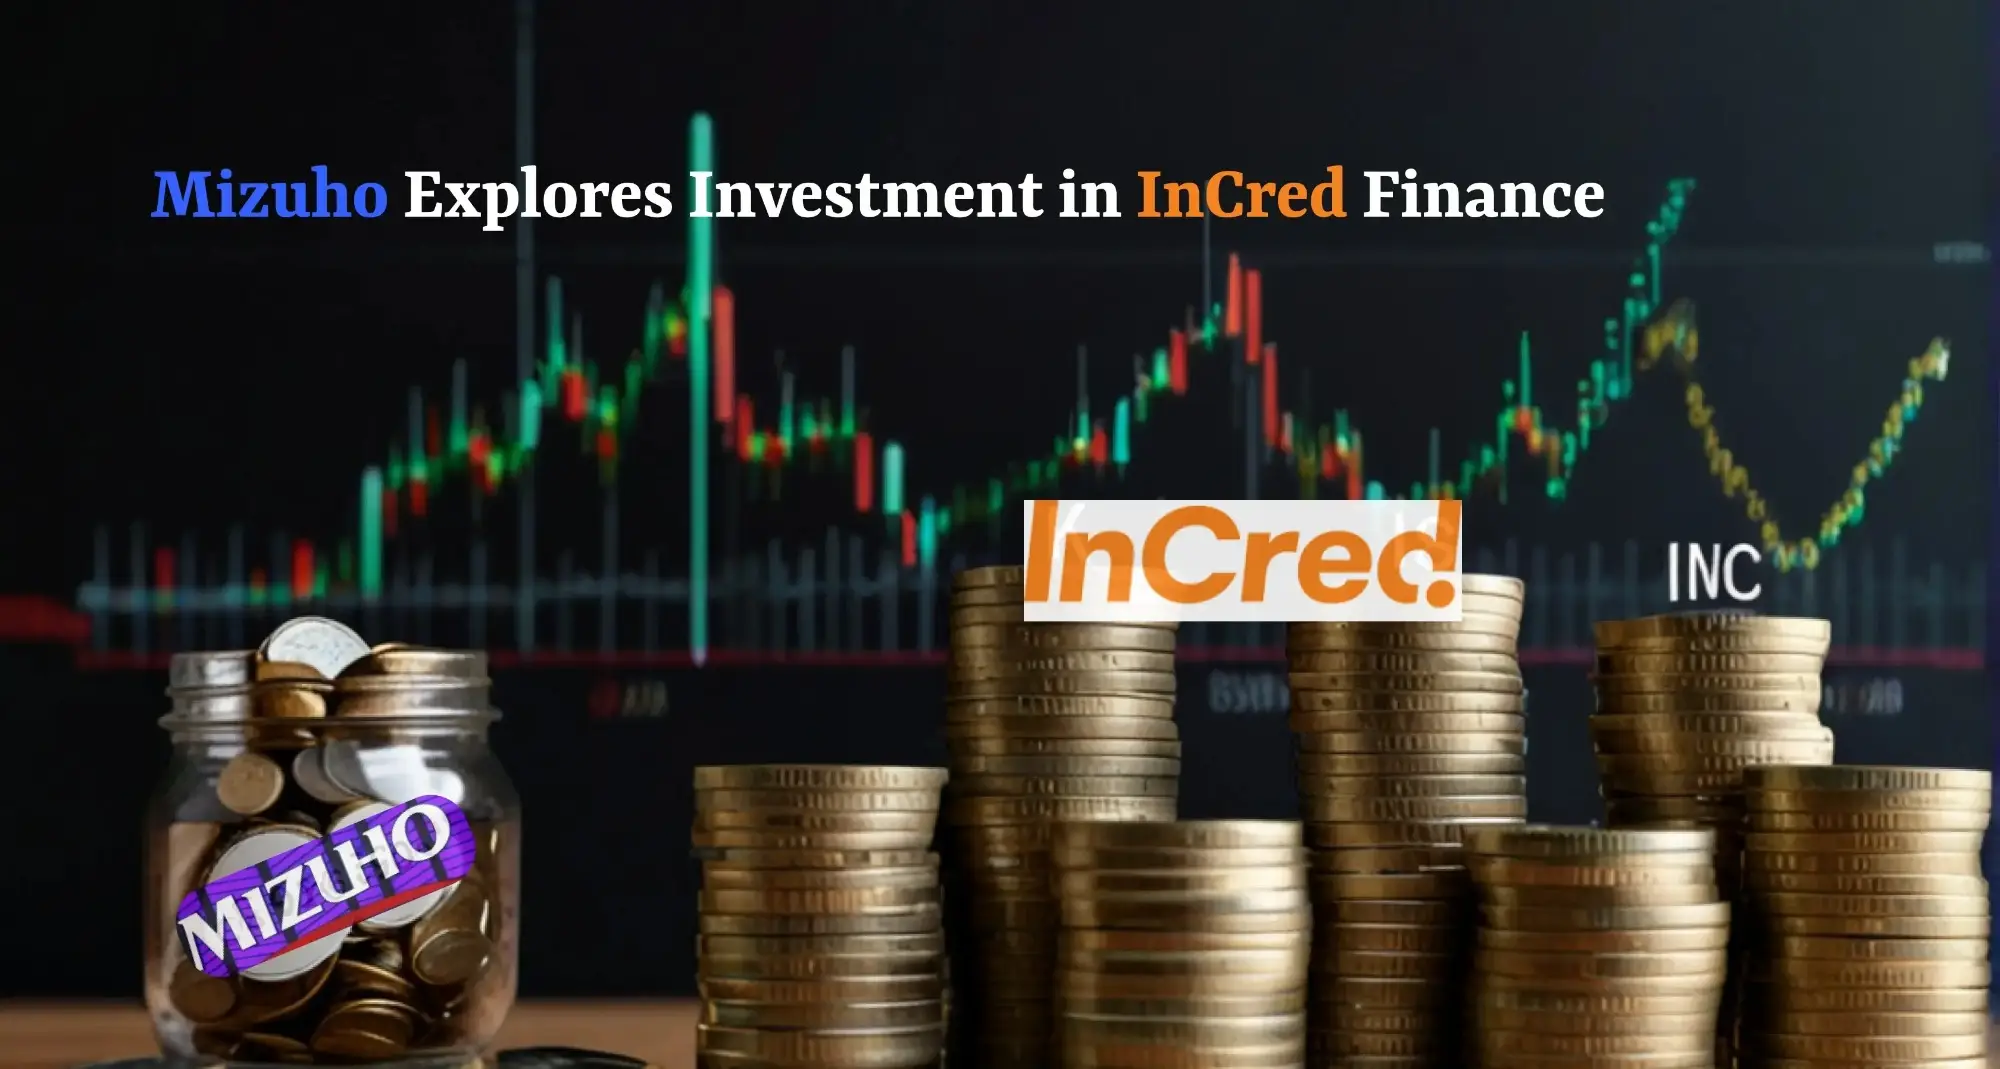  Mizuho Explores Investment in InCred Finance 